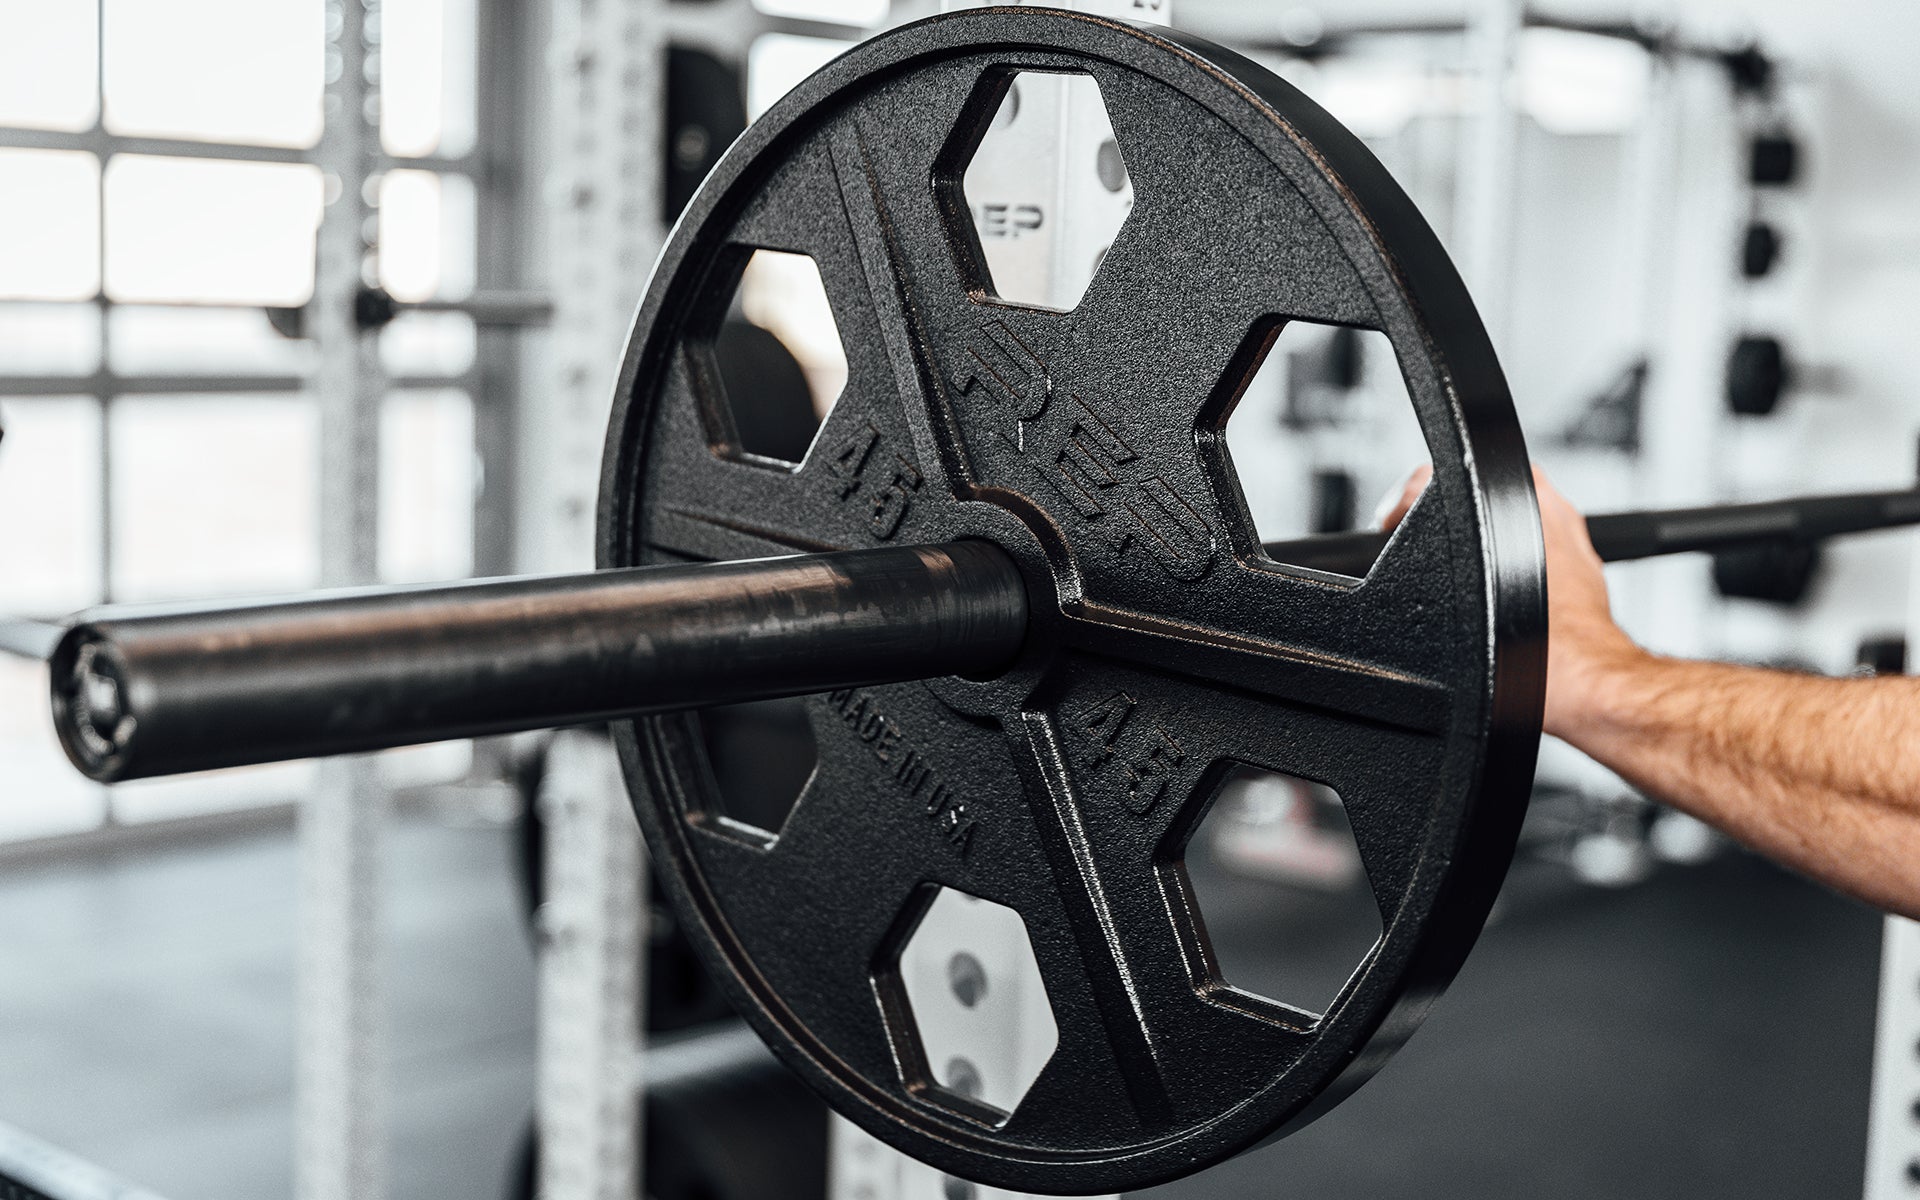 Close-up view of a 45lb USA-Made Equalizer Iron Plate loaded on a racked barbell.